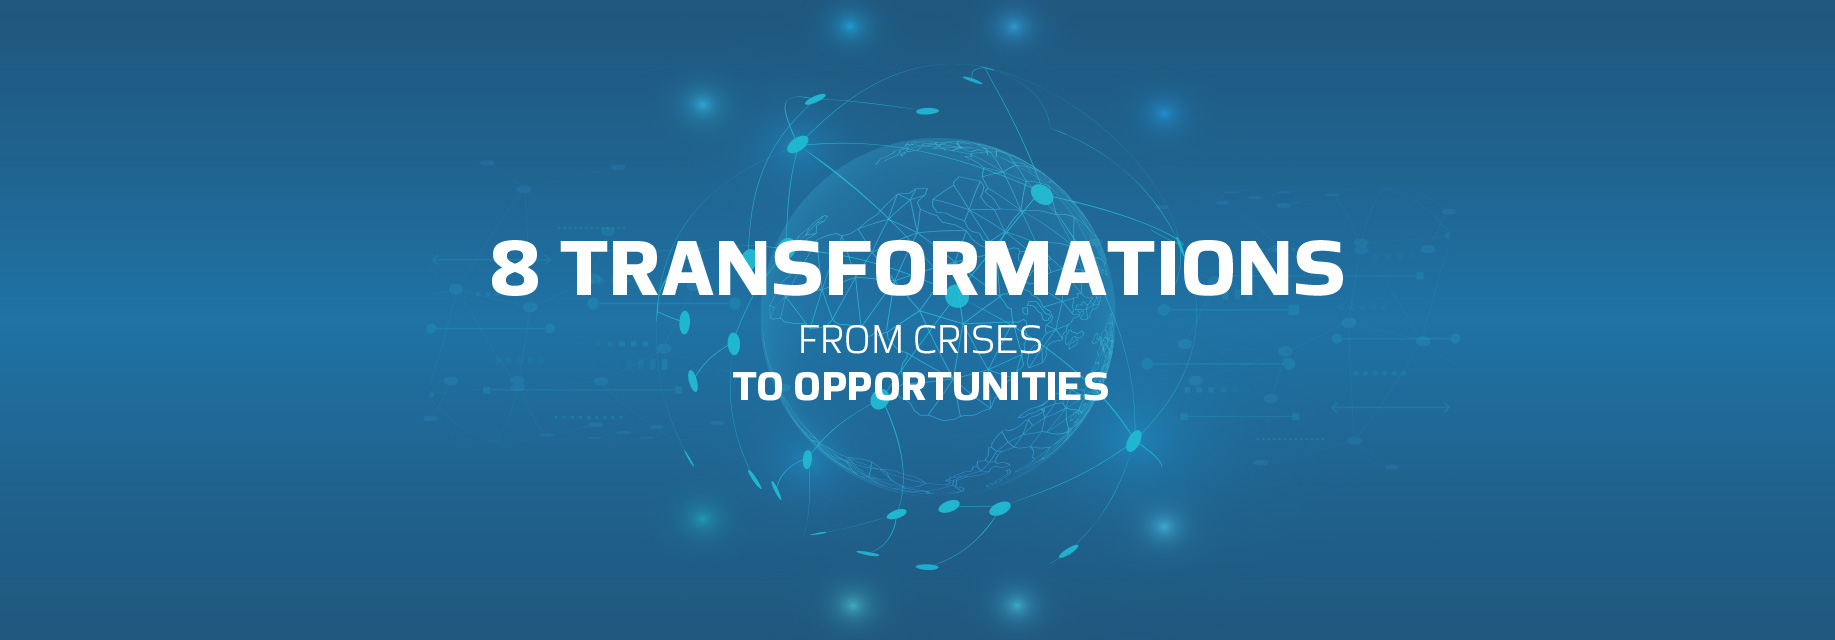 8 Transformations: From Crises to Opportunities